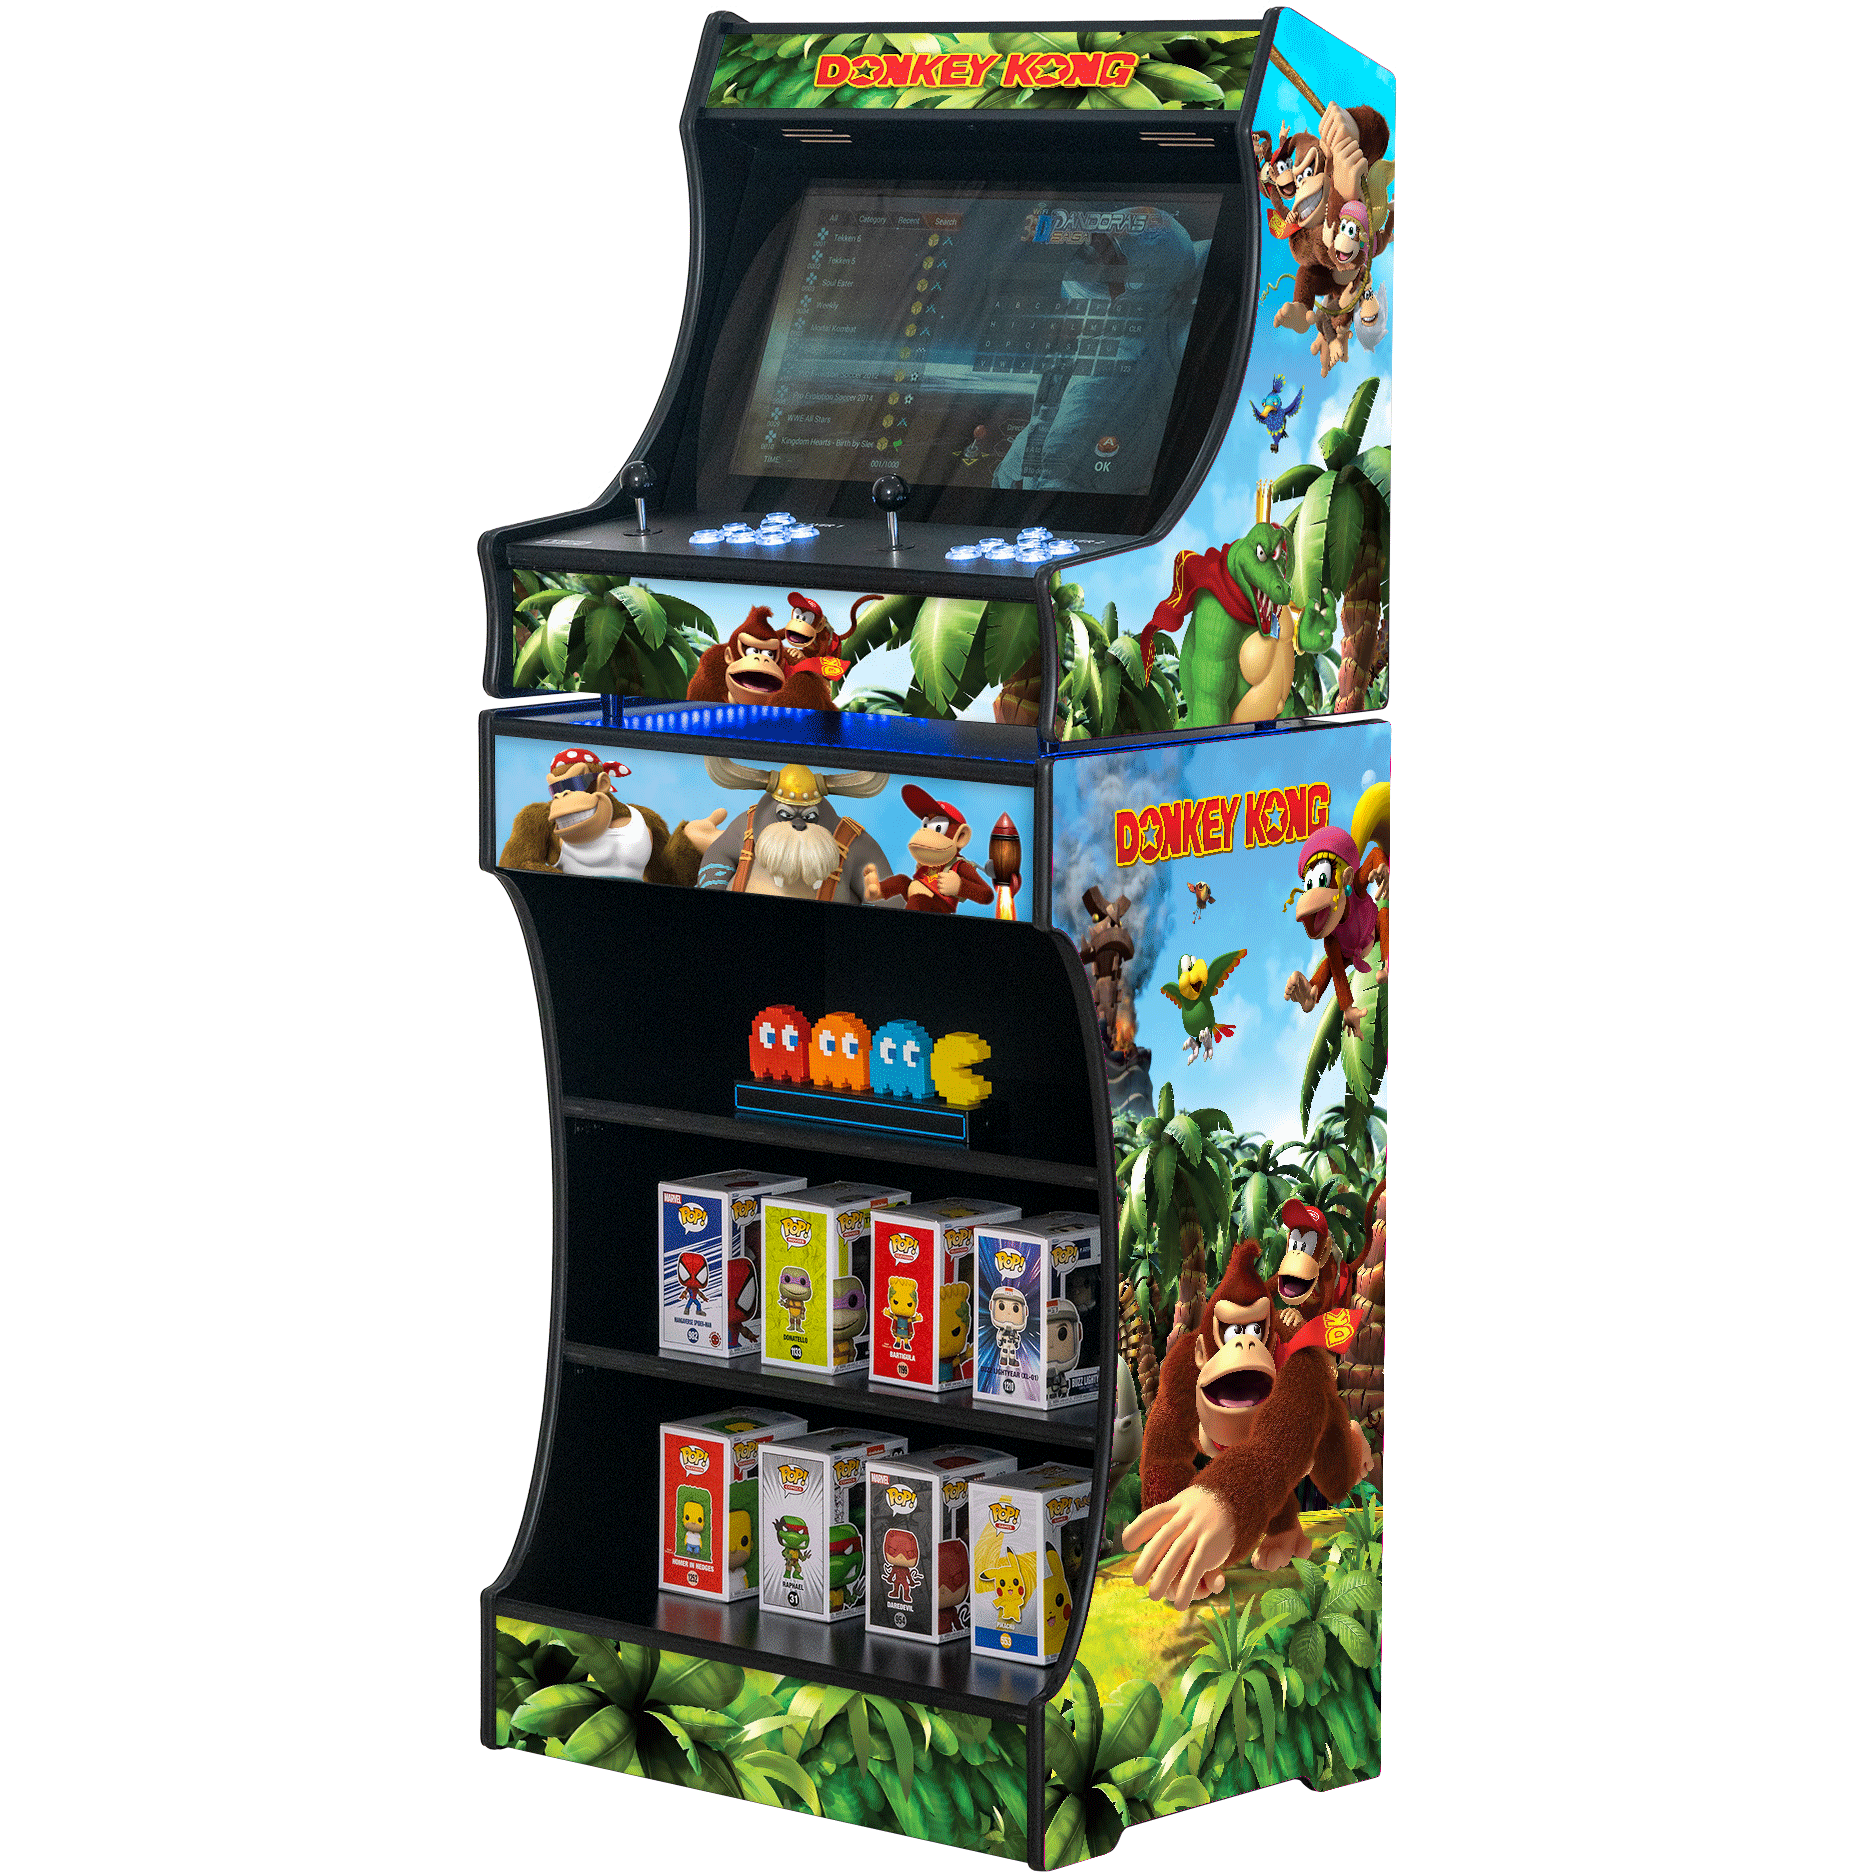 Upright 24 Inch Arcade Machine - 10,000 Games Included